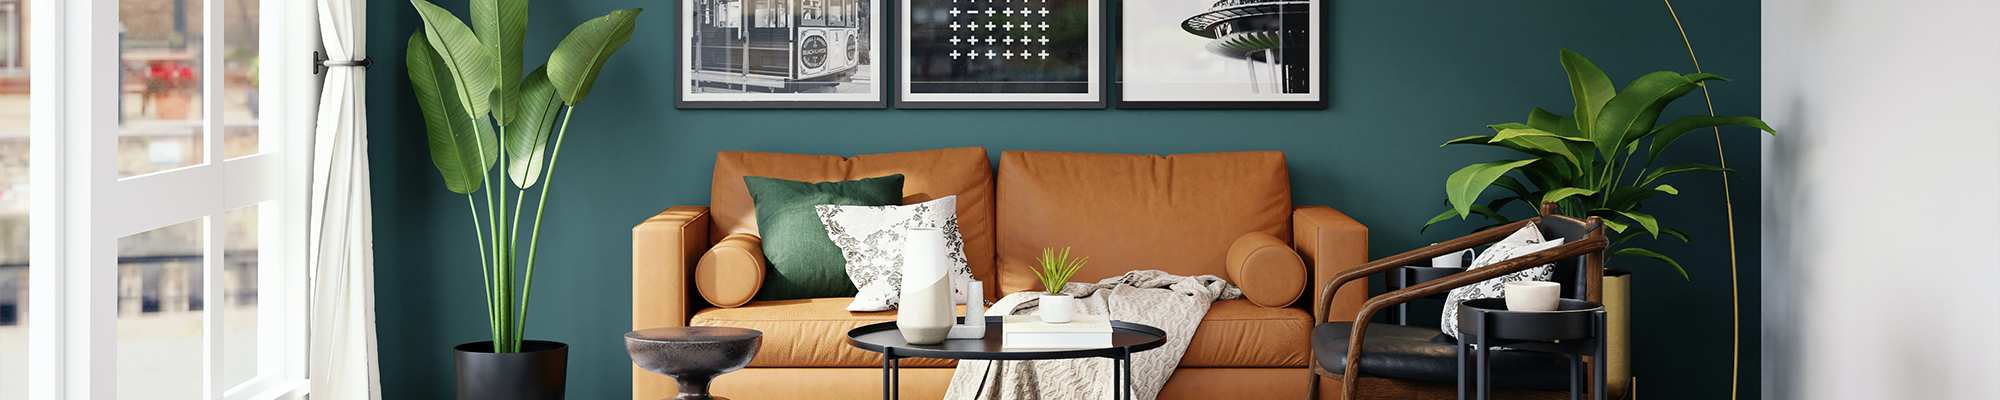 living room with orange couch and houseplants with pictures on the wall from Triangle Flooring Center in Carrboro, North Carolina